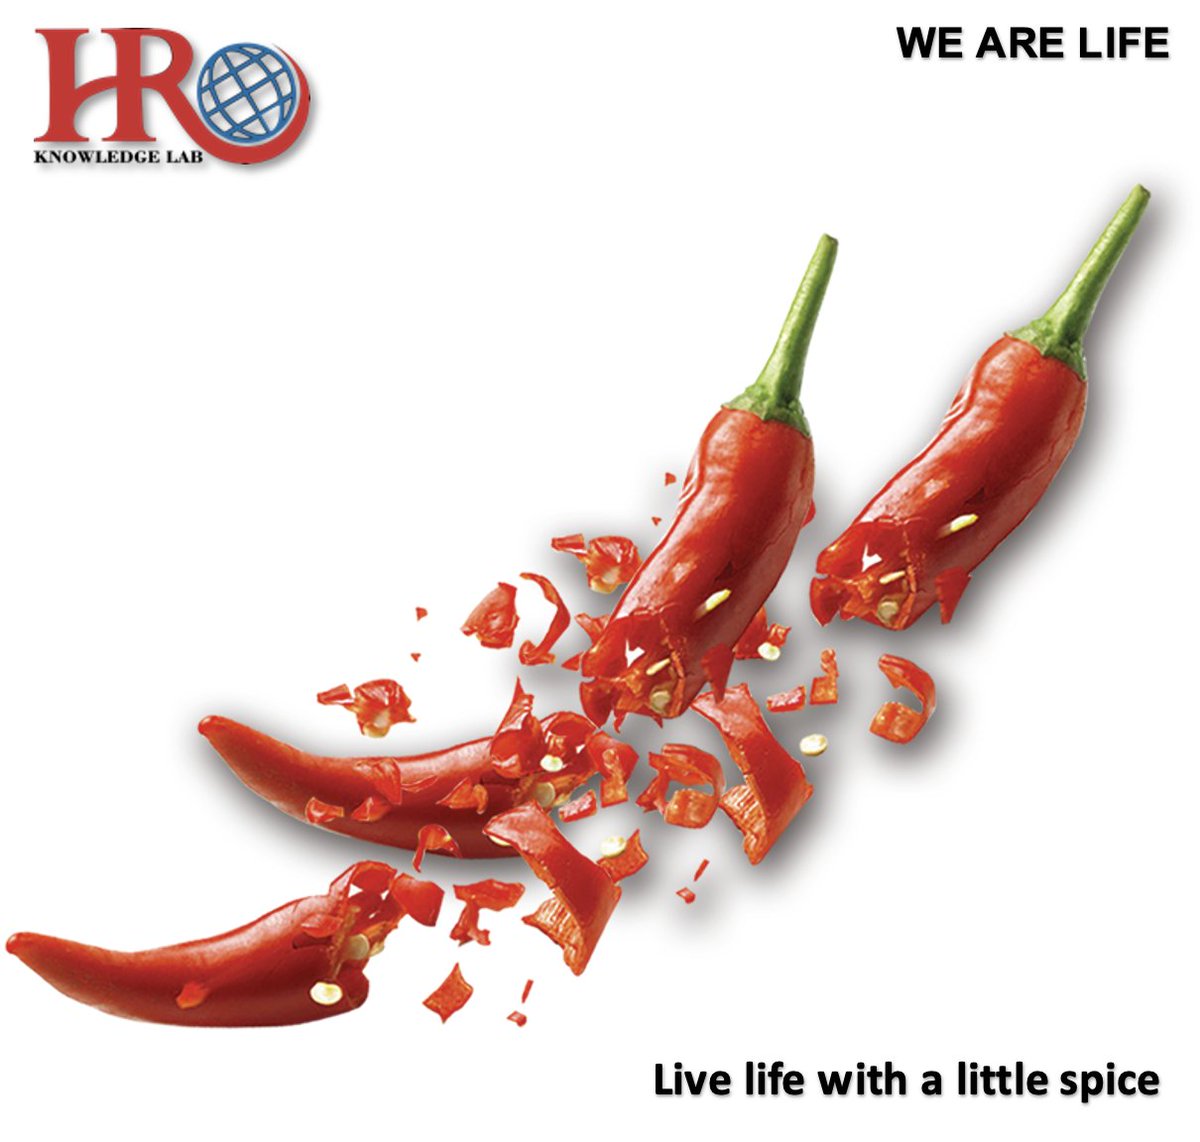 Give yourself sometime and add spice to life.#hrknowledgelab #illustriouscircle #hrklsolutions #hrklinnovation #hrklresearch #HRStrategies #shinebright #HR #staremployees #SmartEmployee #boss #spiceupyourlife #spicechallenge #spicycareer